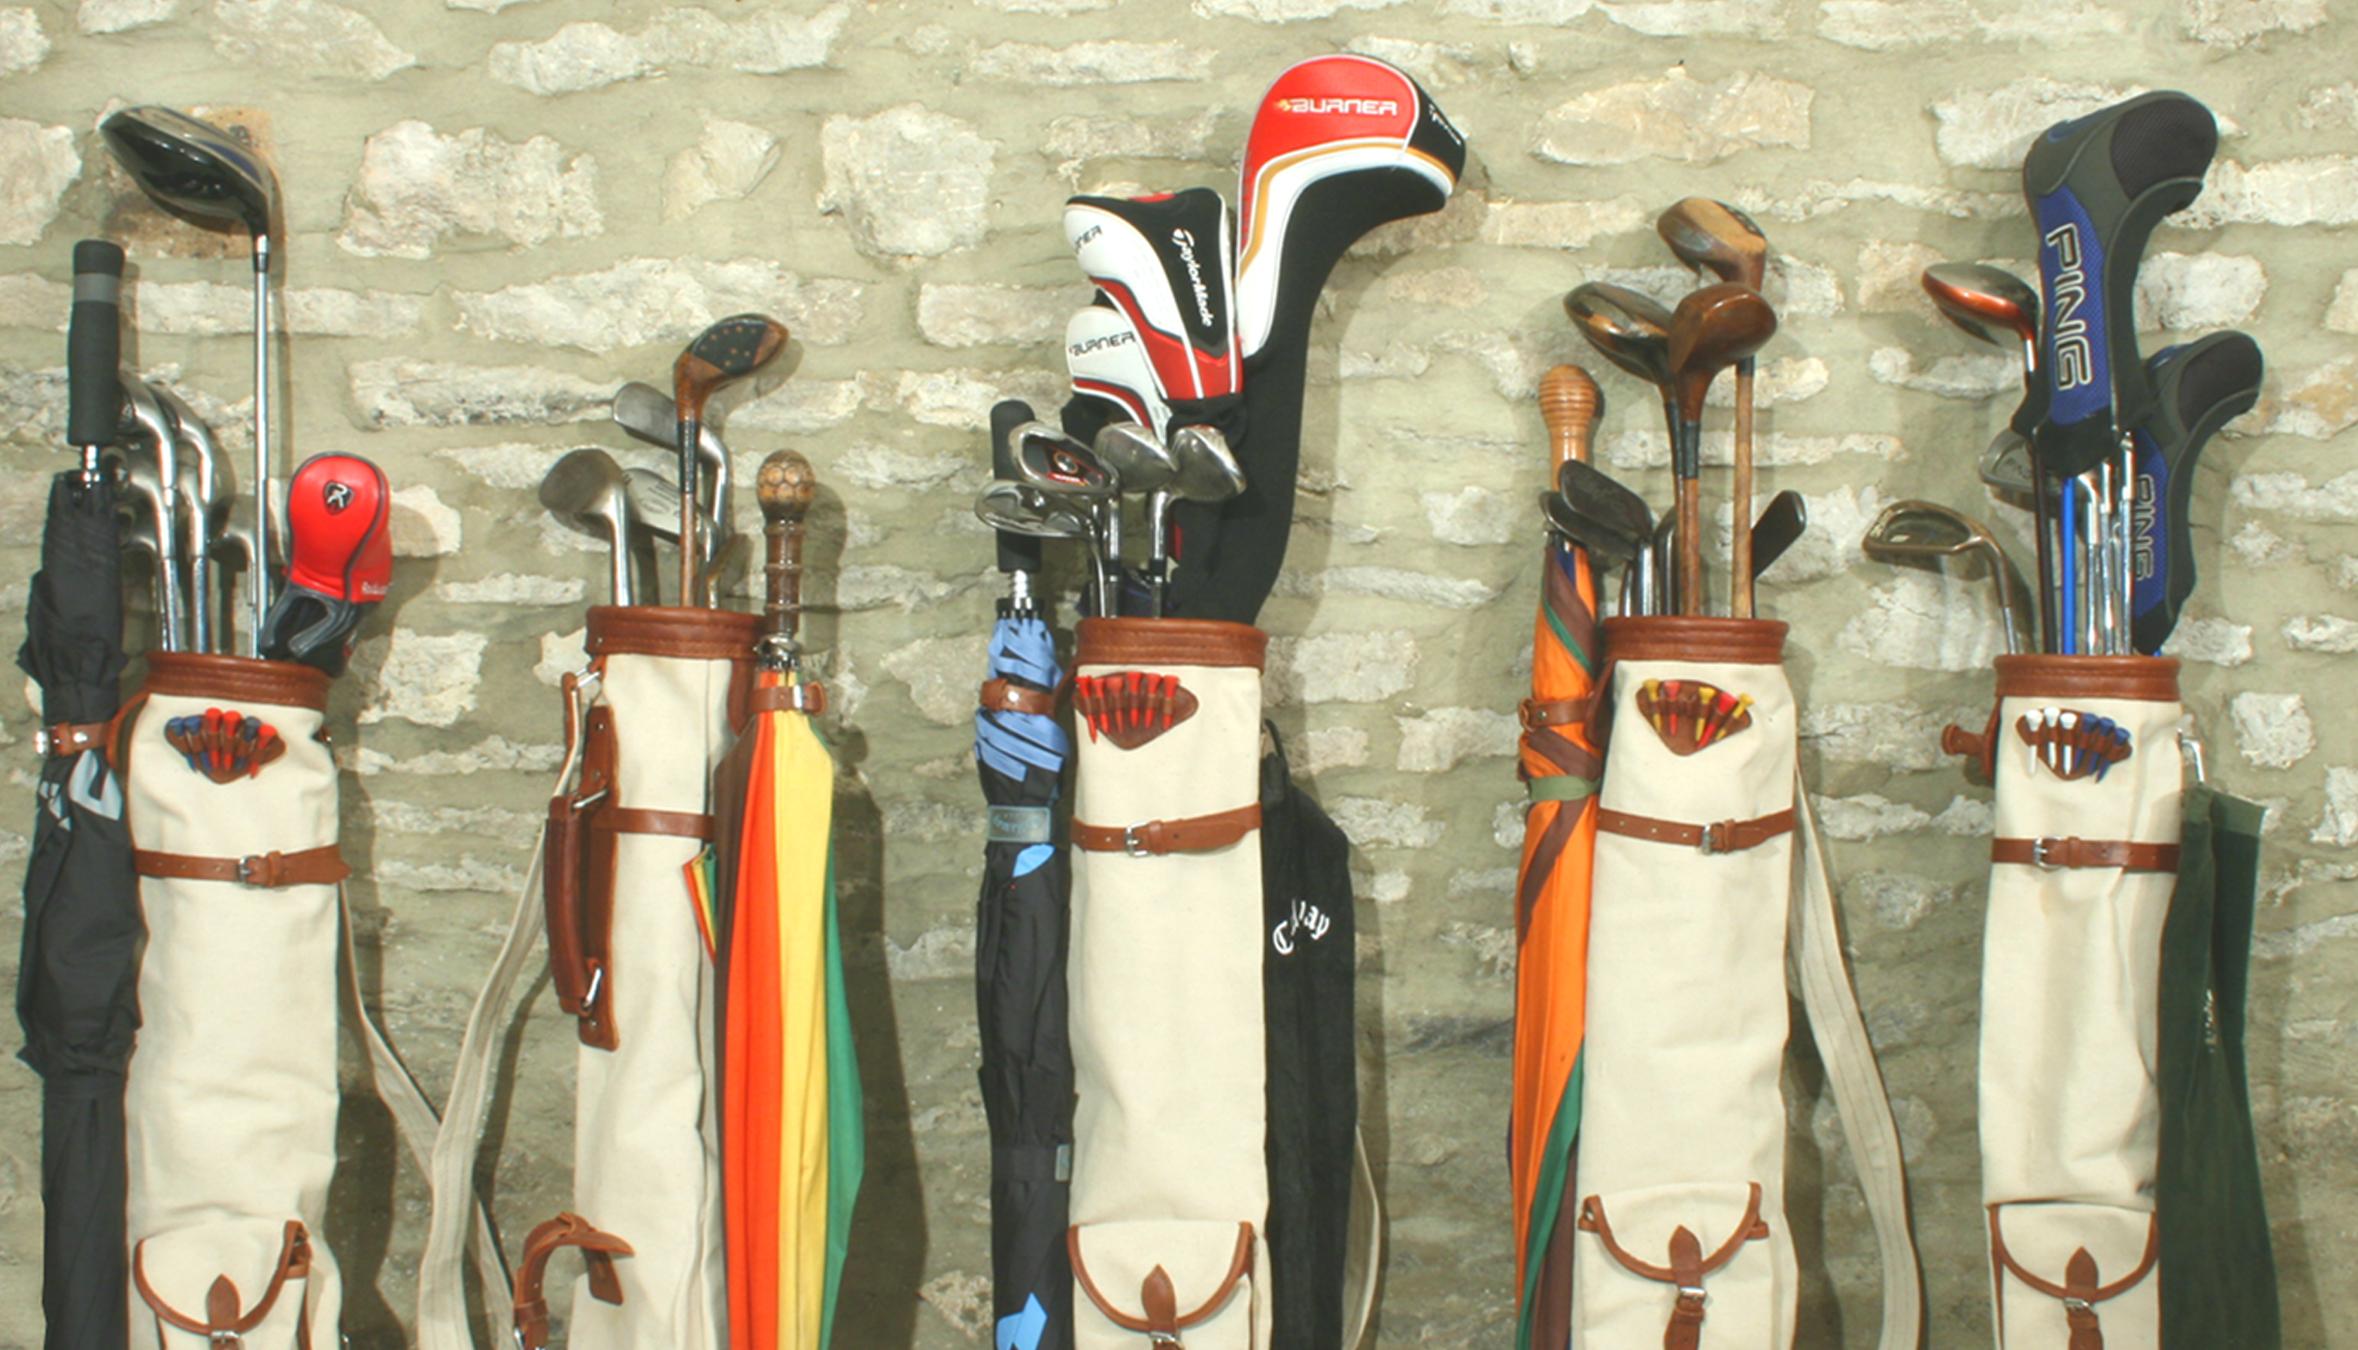 Canvas golf bag in a vintage 1930s style.
If you need a lightweight golf bag and want to stand out from the crowd then this traditional looking pencil golf bag is for you. The inspiration was taken from designs of the hickory era and has resulted